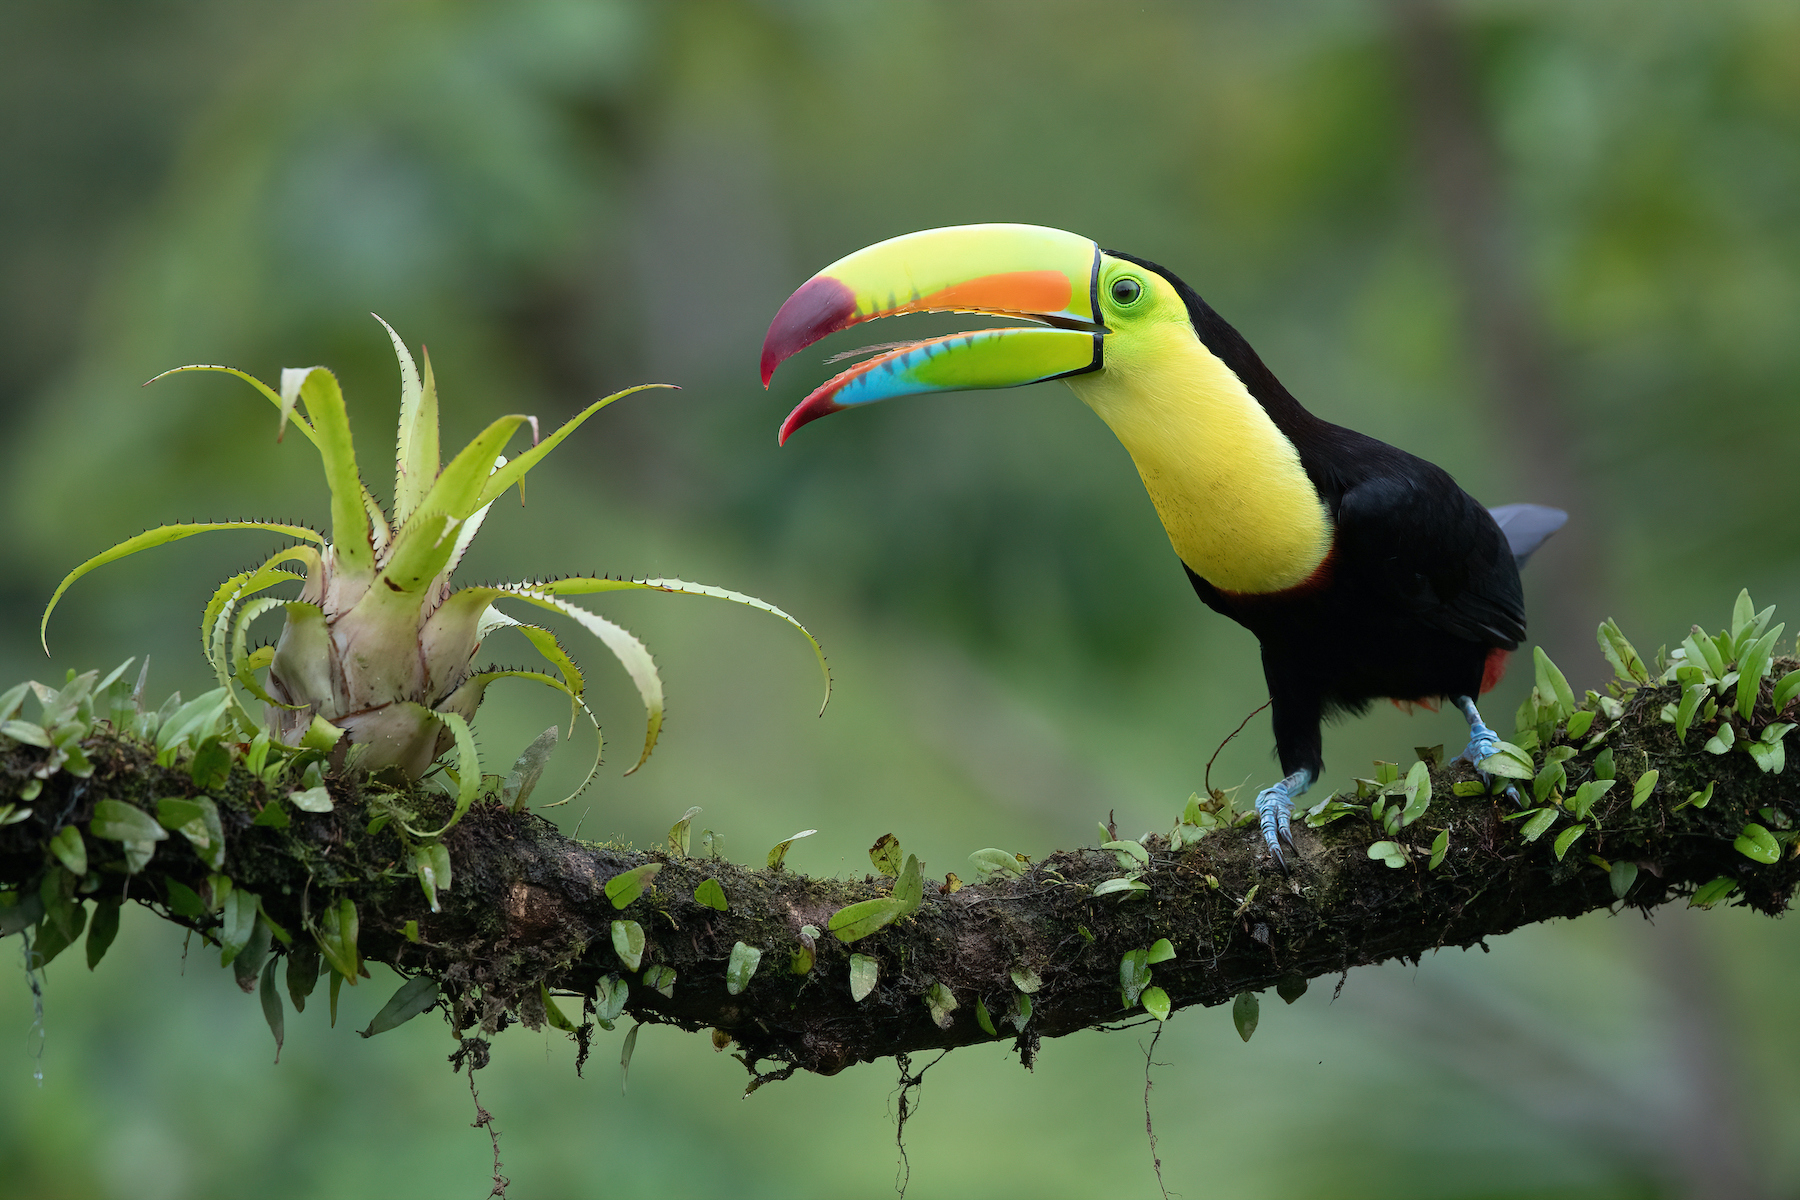 the tongue of a Keel-billed Toucan